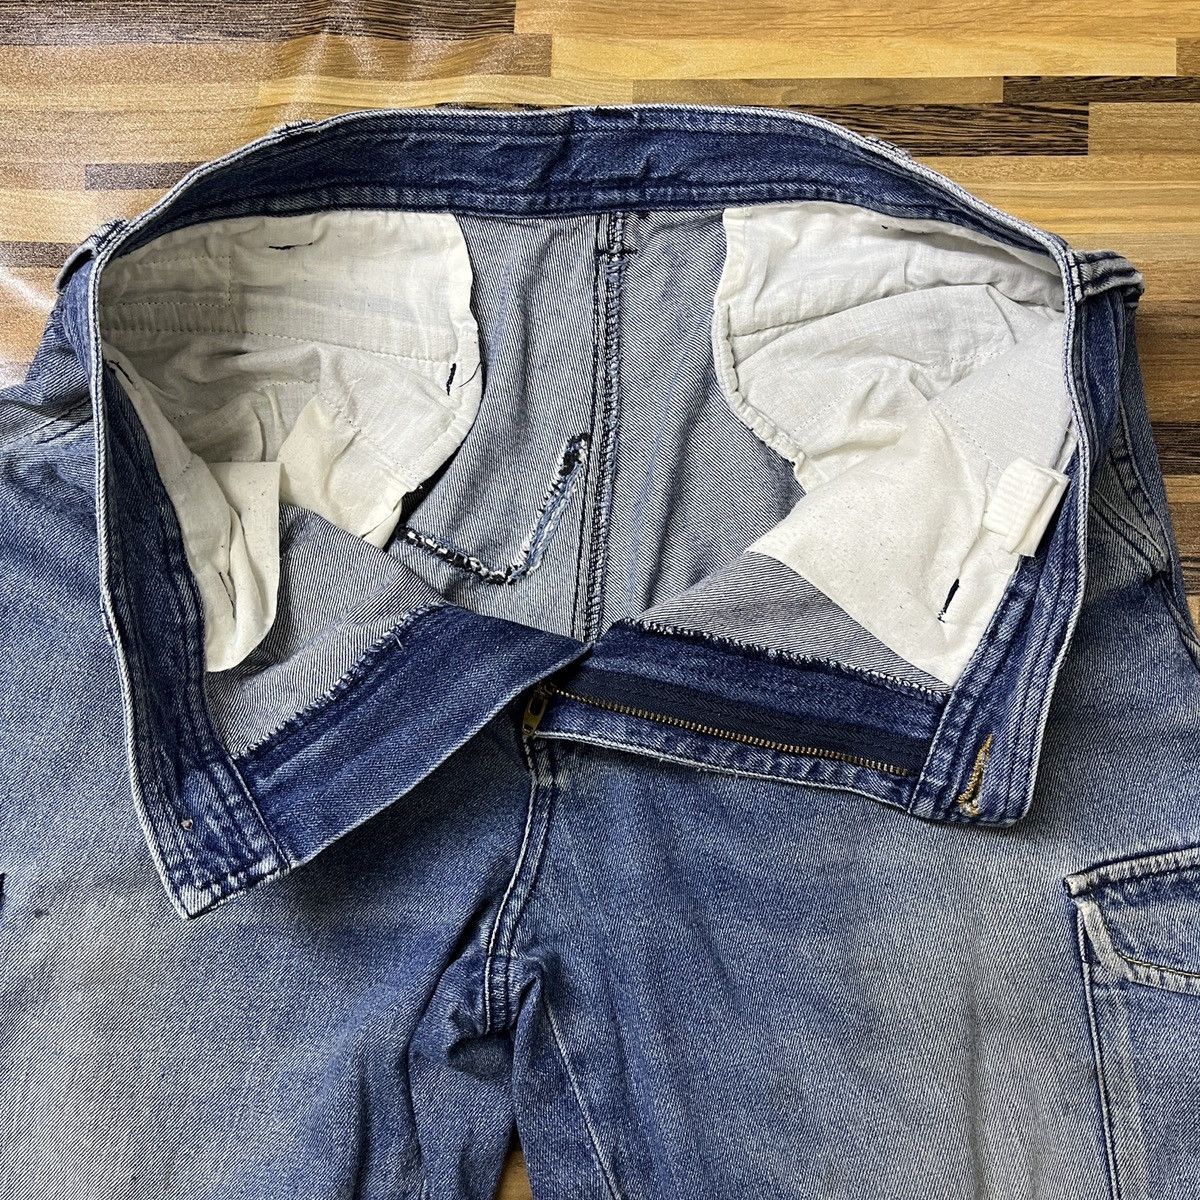 Distressed Denim - Worn Even River Japanese Cargo Denim Ripped Baggy Style - 10